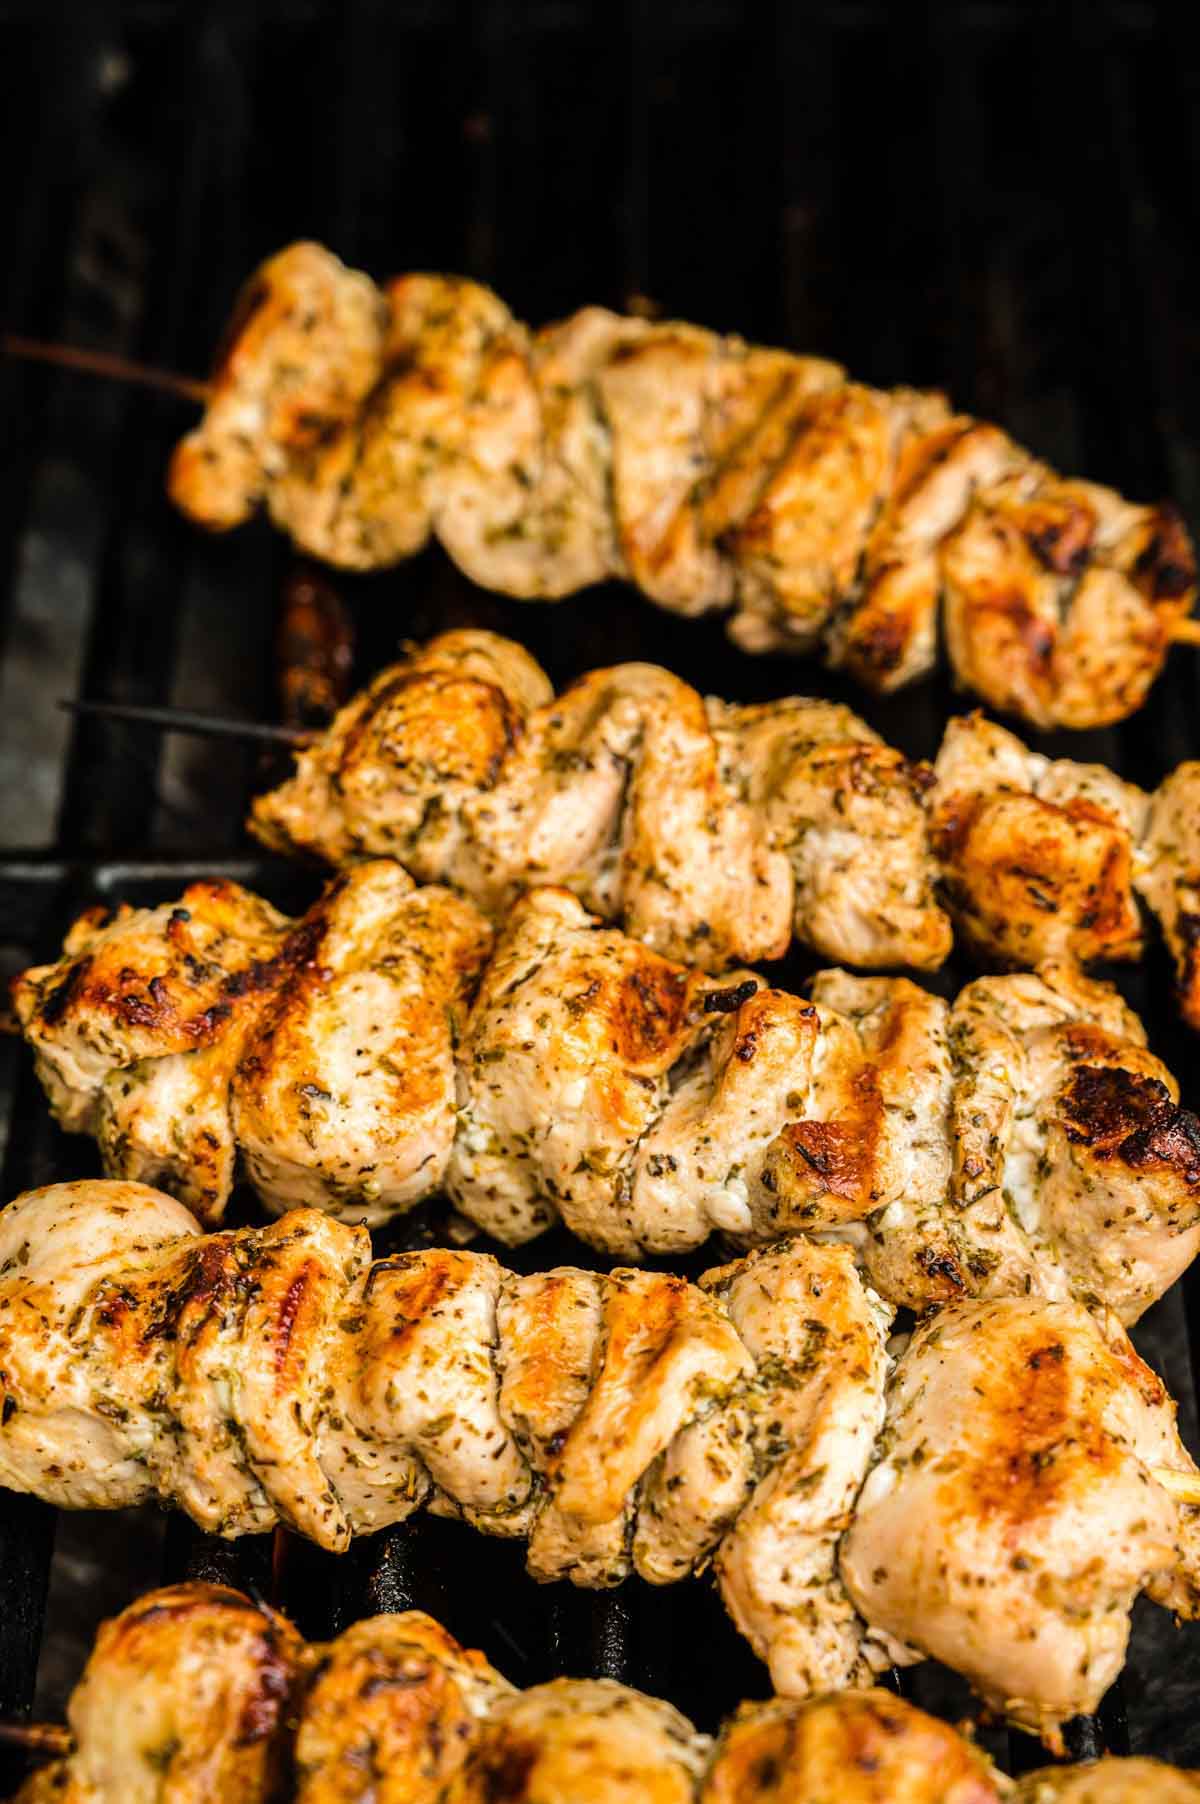 A Close-Up Image of Golden-Brown Chicken Souvlaki on Top of a Grill